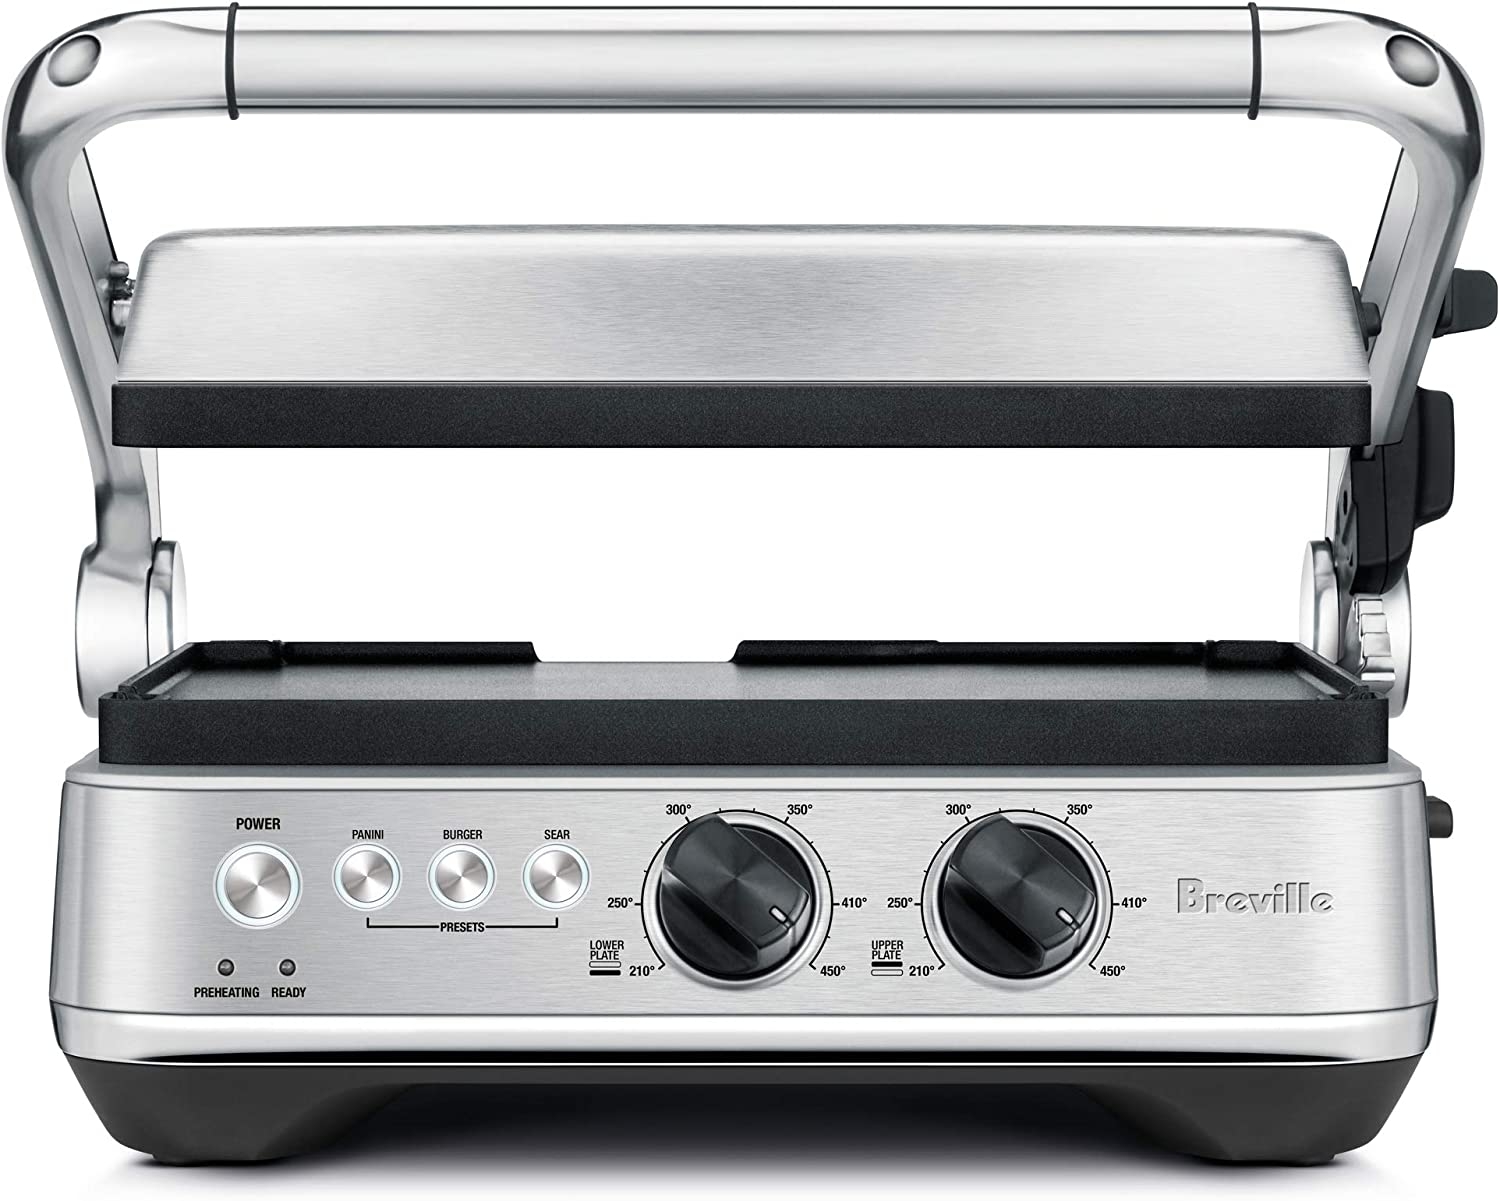 Breville BGR700BSS the Sear and Press countertop electric grill, Medium, Brushed Stainless Steel Import To Shop ×Product